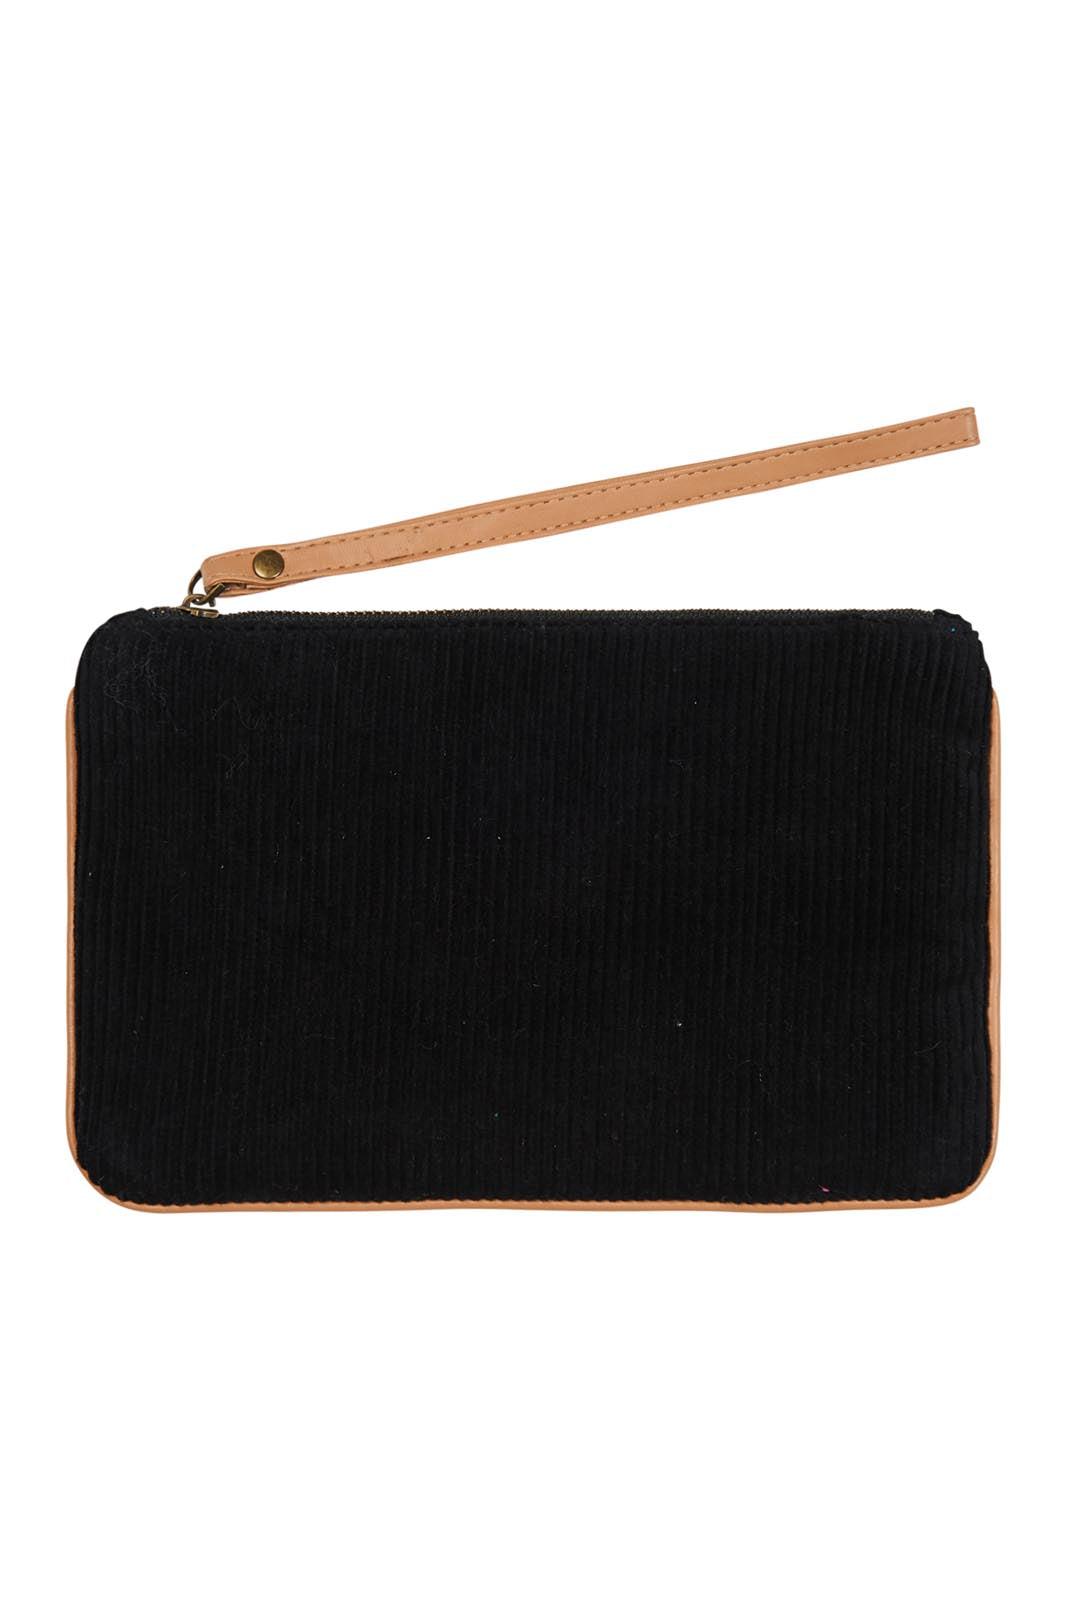 Vienetta Clutch - Black-Bags & Clutches-Eb & Ive-The Bay Room